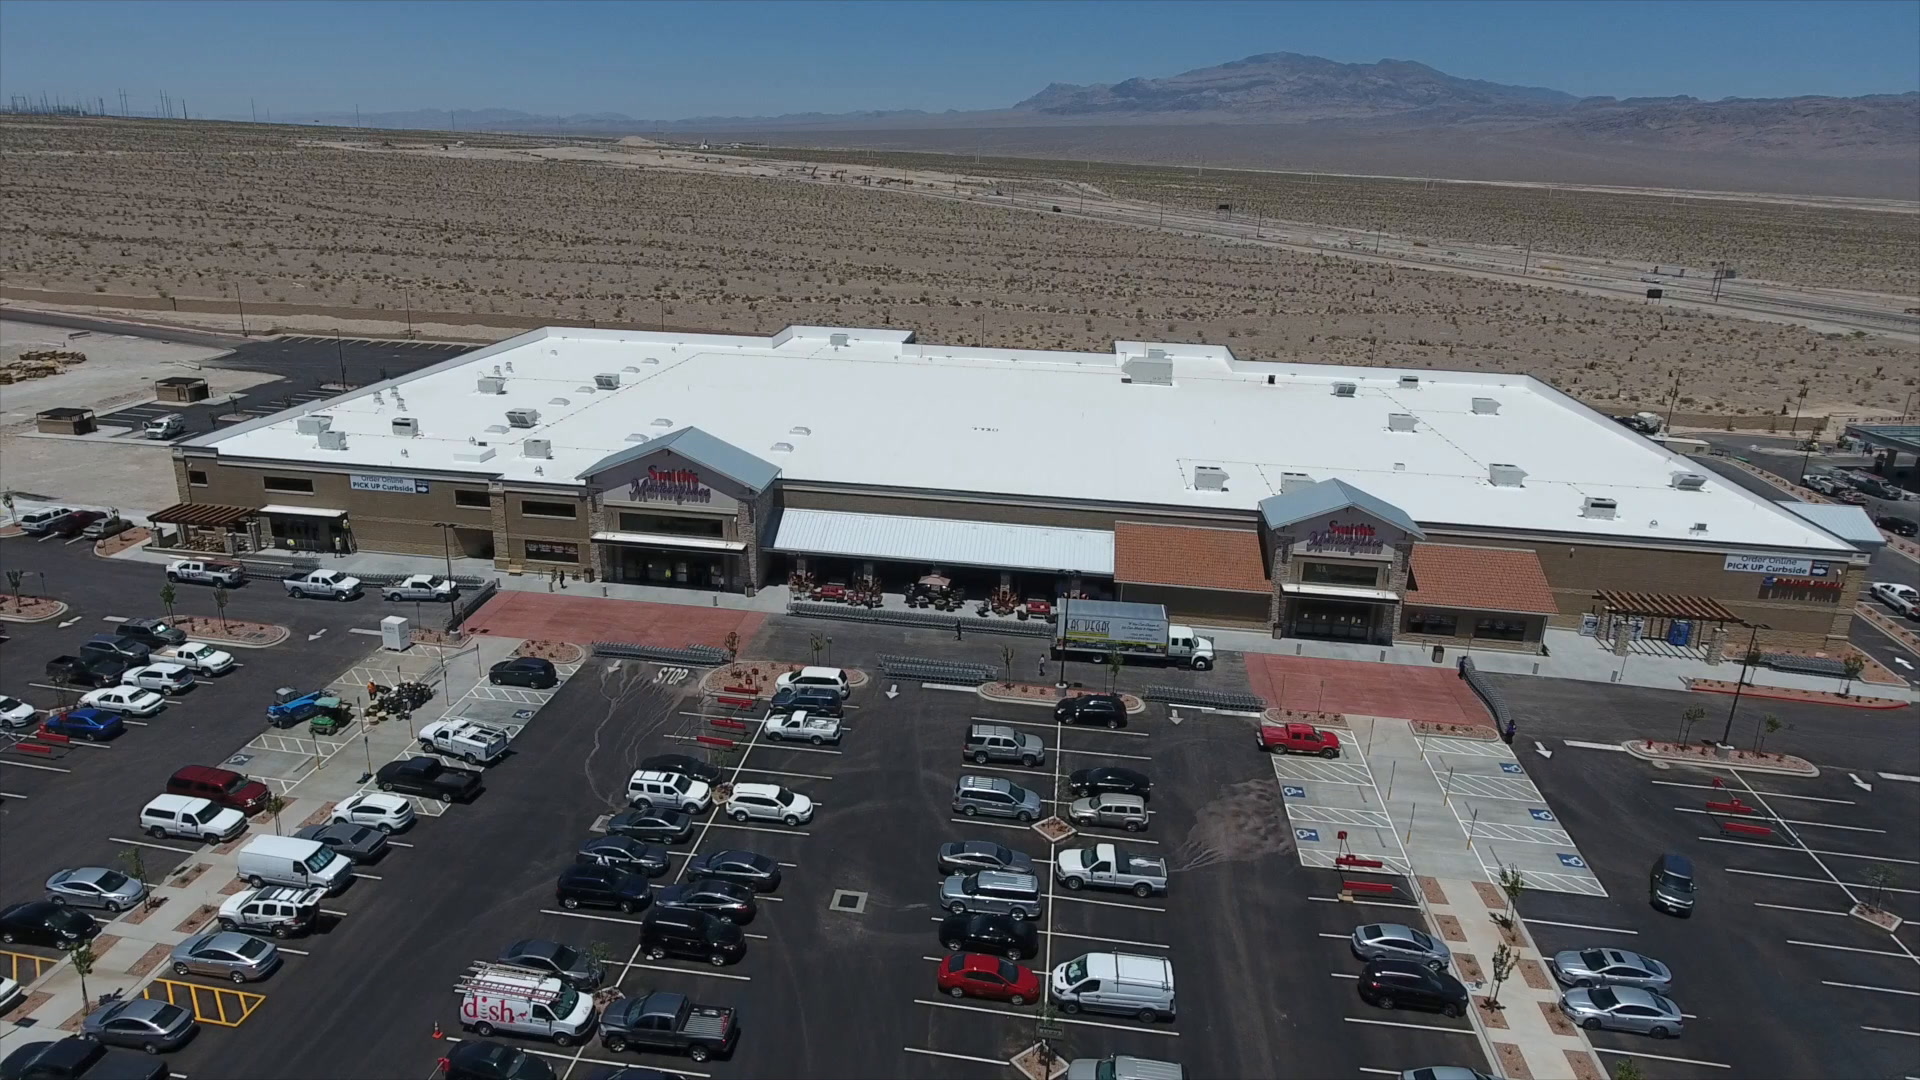 125,000-square-foot Smith’s store opening in Skye Canyon | Las Vegas Review-Journal1920 x 1080